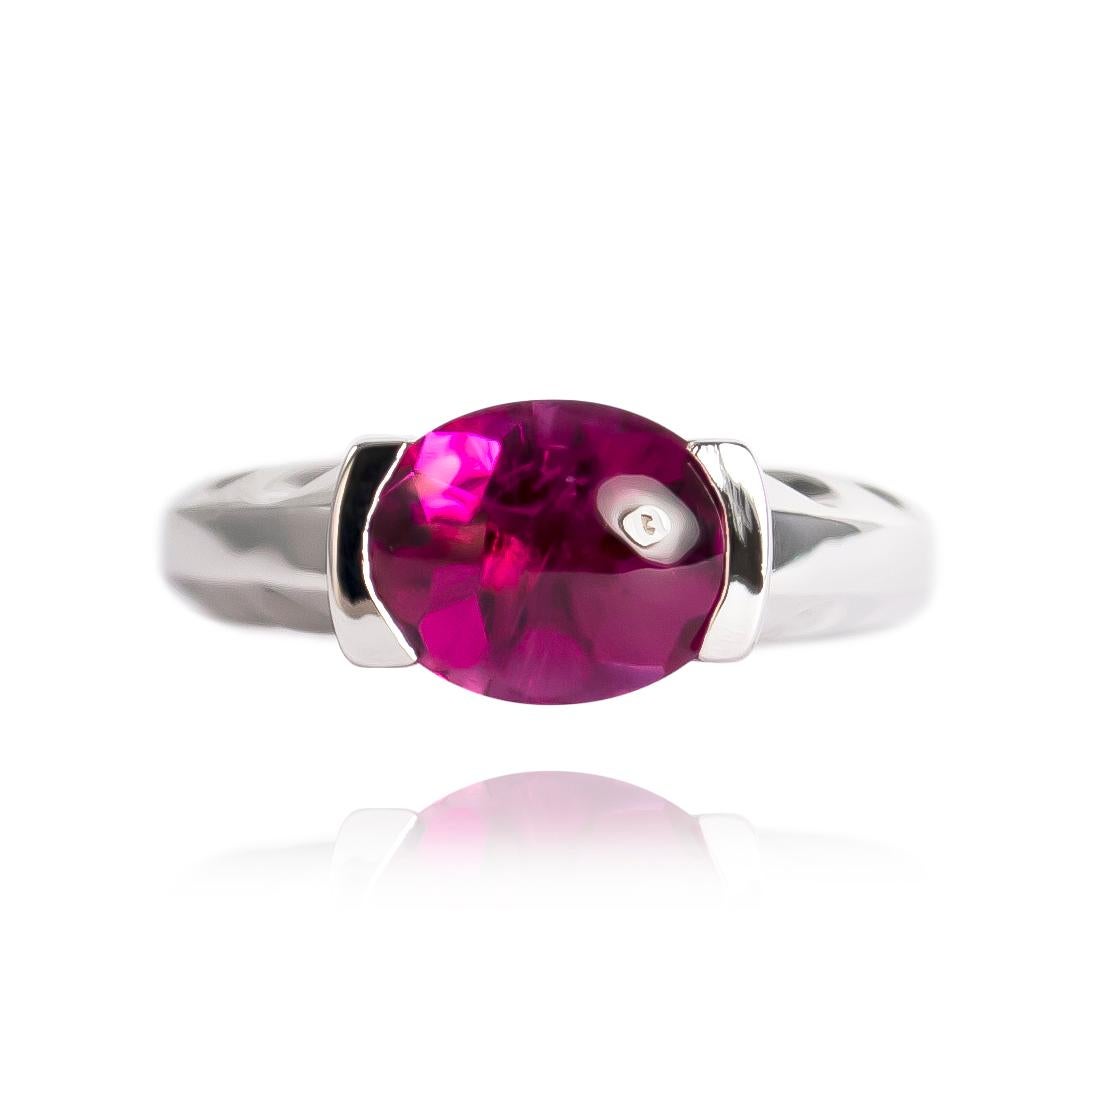 This bold and architectural ring is a one of a kind piece-every aspect of this ring is unique! It features a 3.35 carat cabochon oval rubellite of a saturated, intense, purplish-pink color. The open half bezel setting emphasizes the stone, and